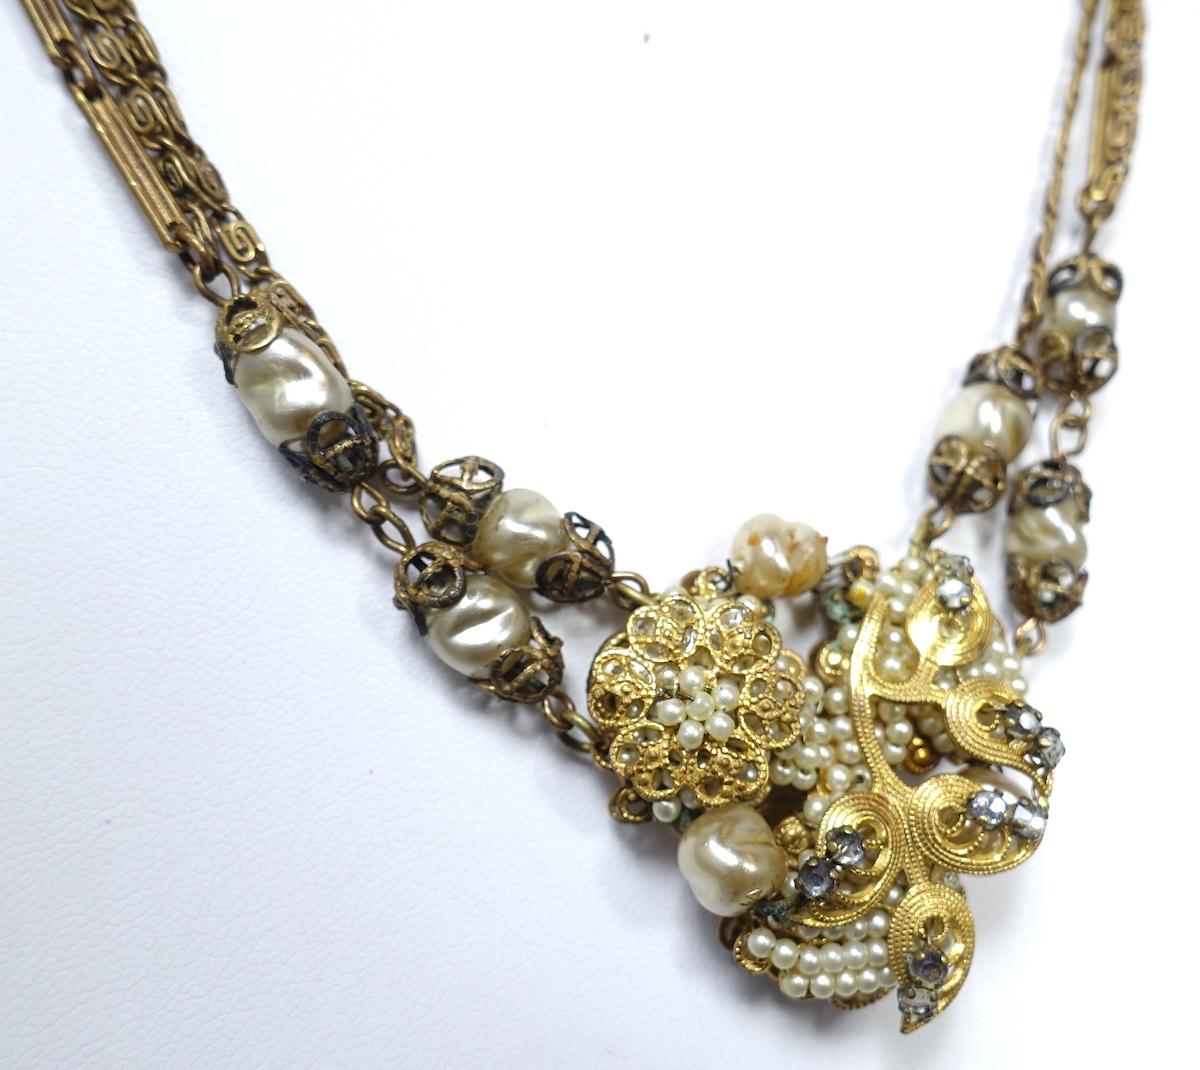 This vintage early Miriam Haskell necklace features faux pearls with rose montee accents in a gold tone setting. It has a double chain with a slide in clasp.  The necklace measures 16-1/2” with the centerpiece 1-1/2” x 1-3/8”. This necklace is in